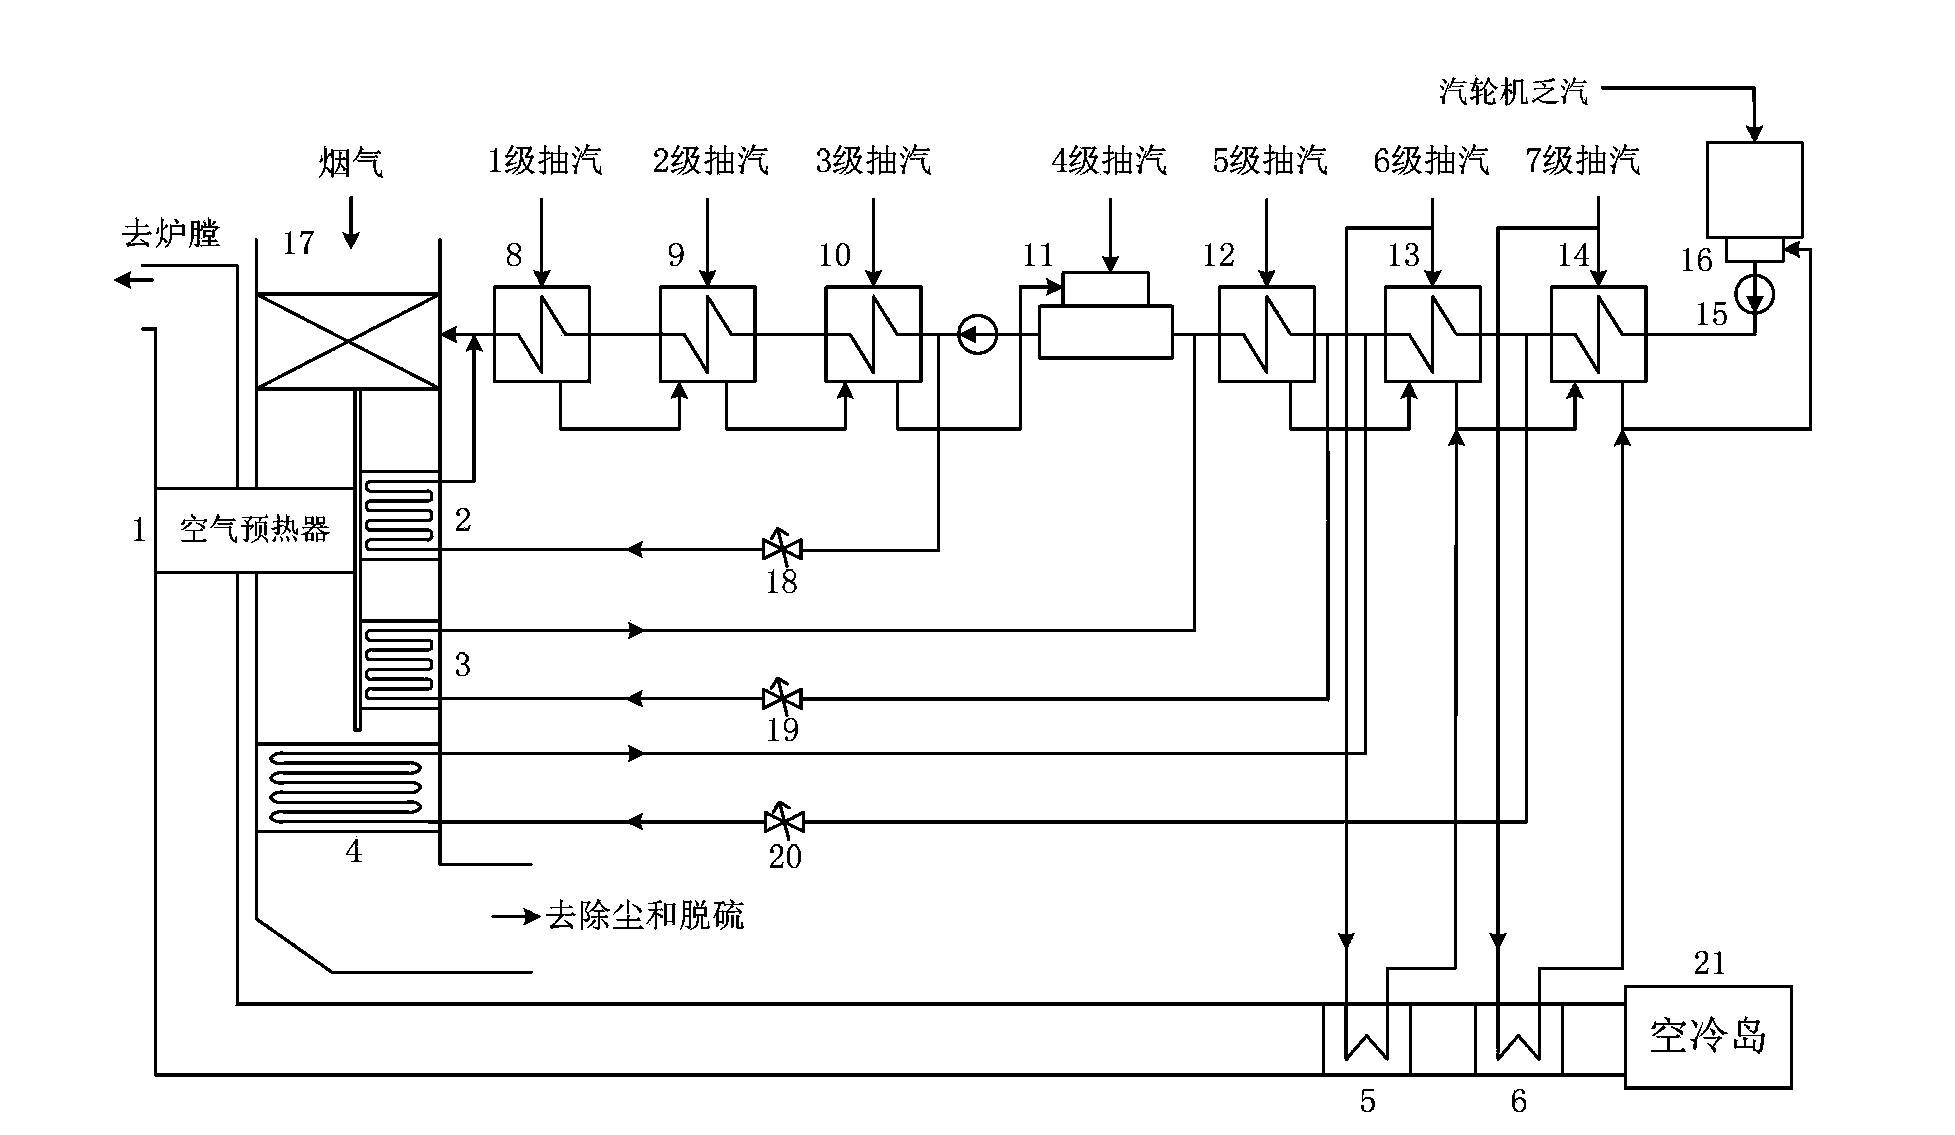 Engine-boiler coupled deep waste heat utilization system for air cooling unit